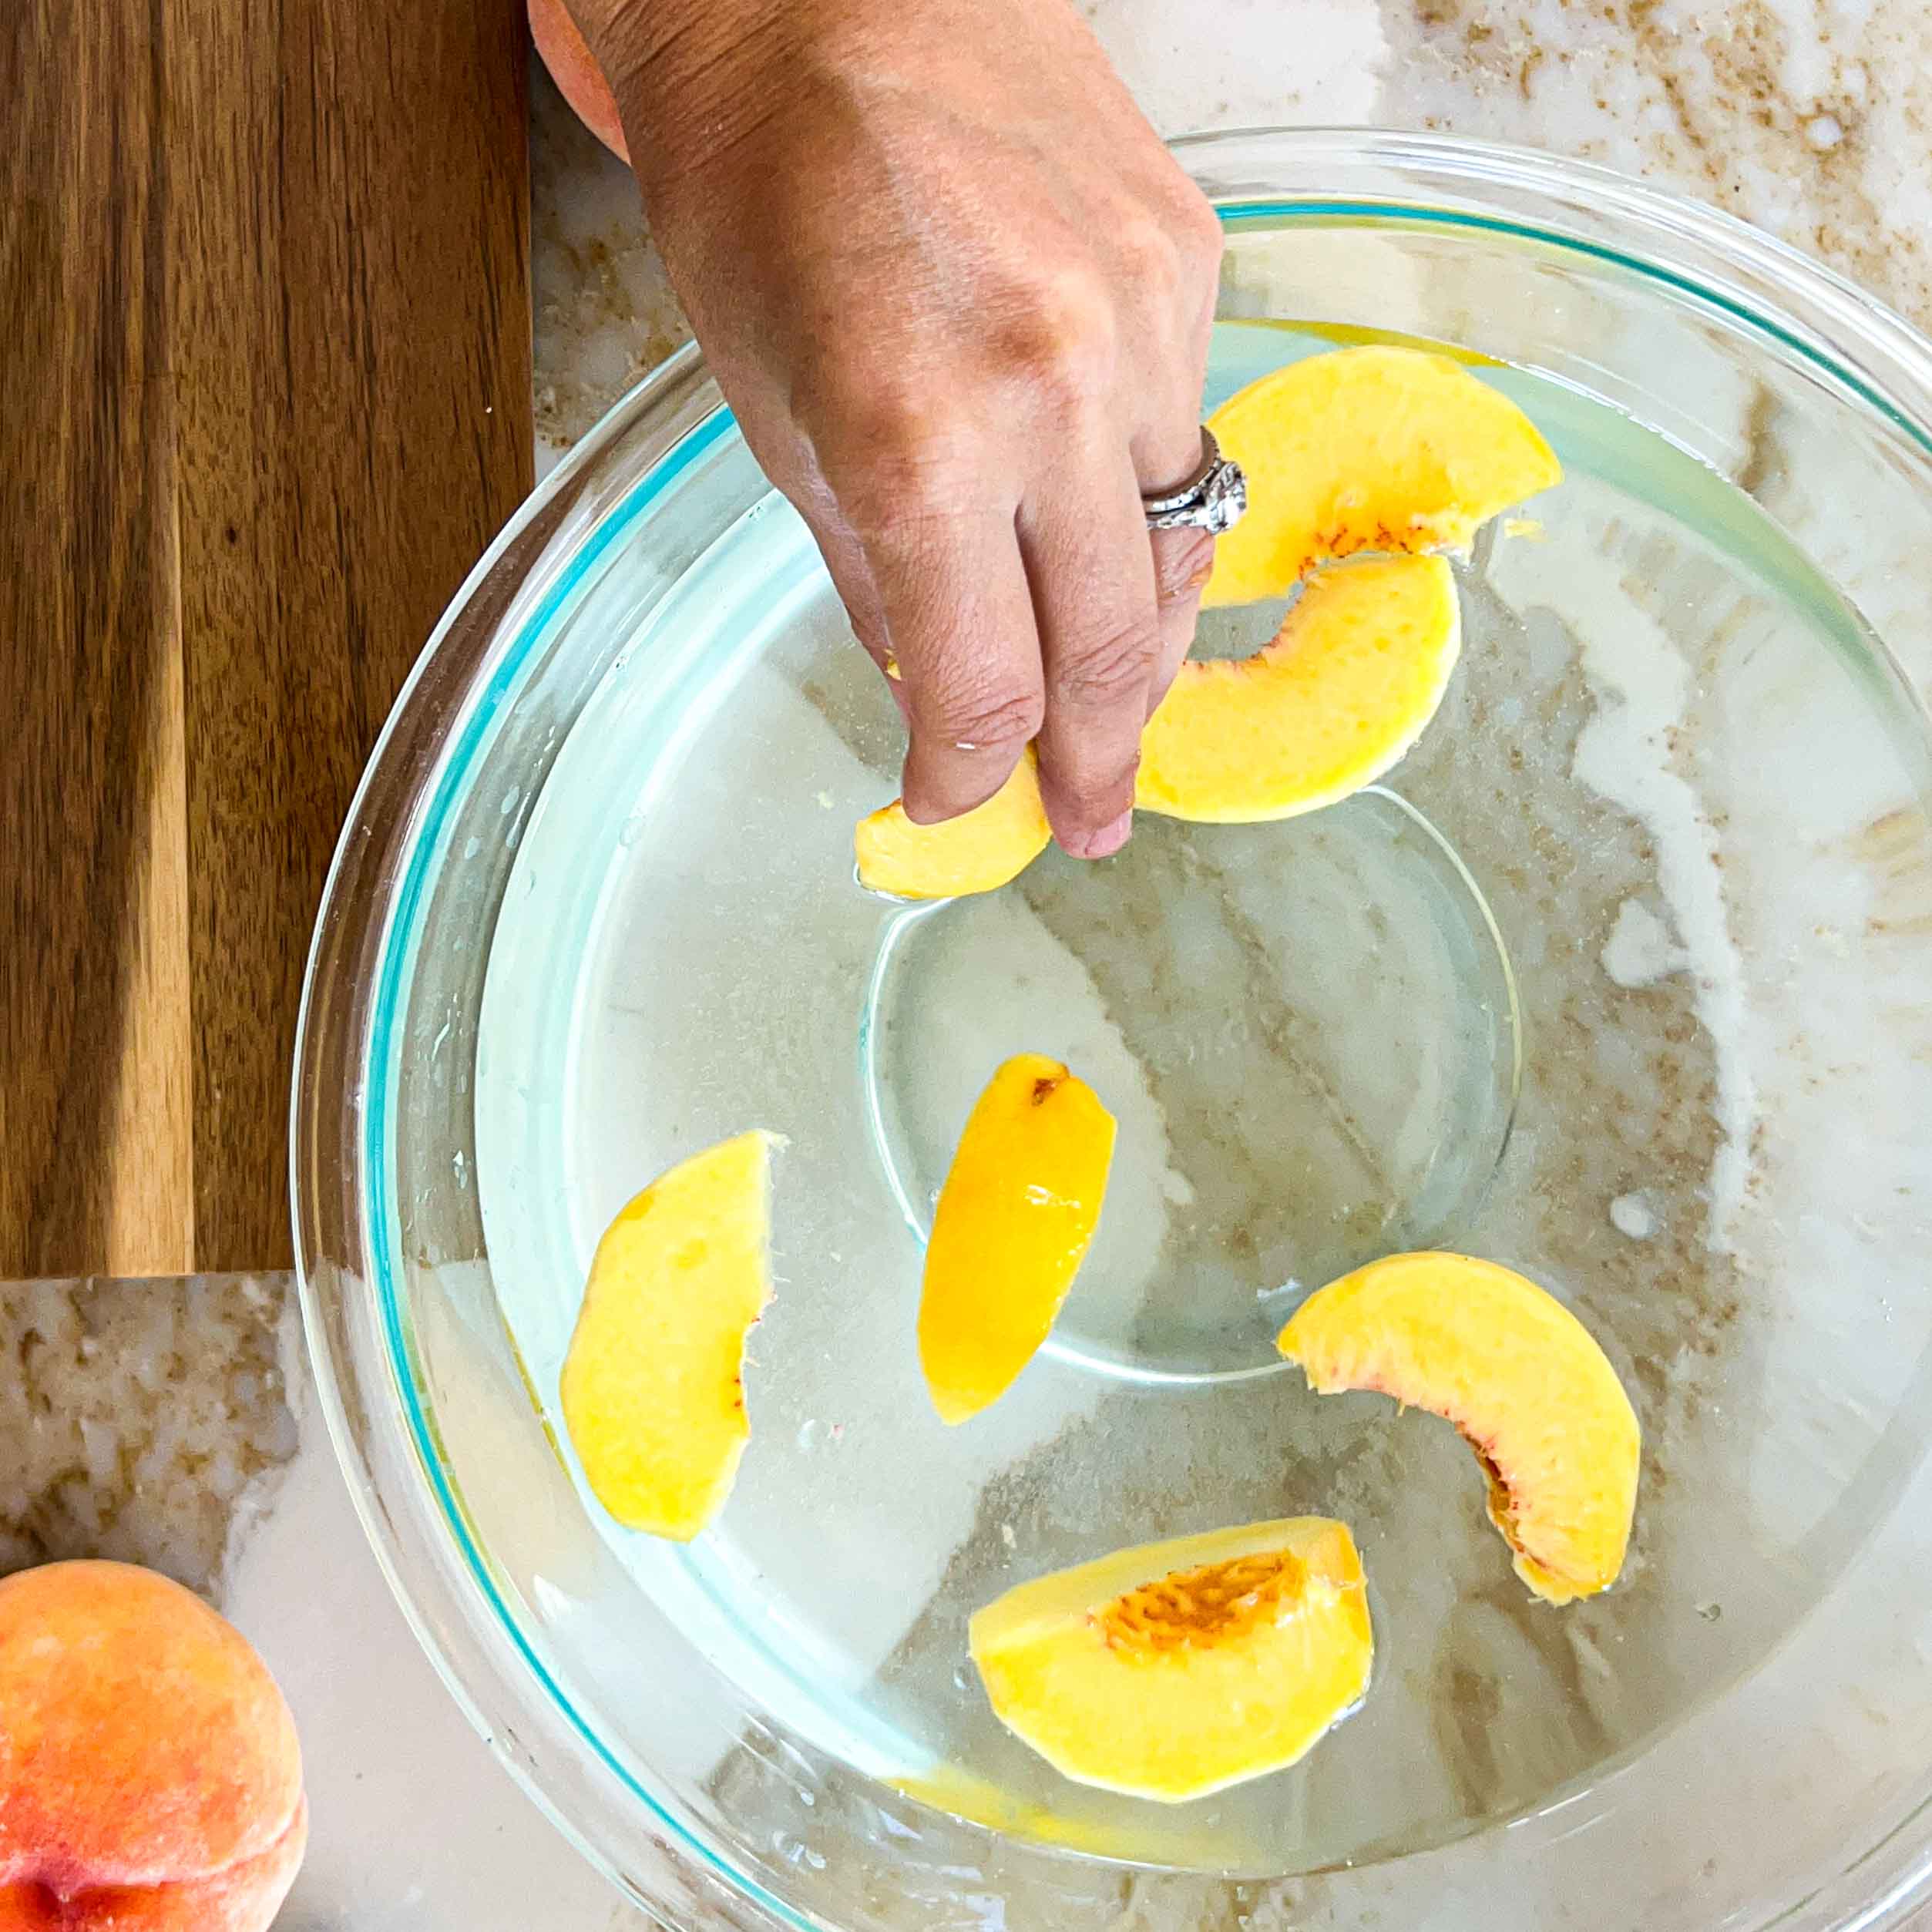 Fresh peach slices soaking in a bowl of lemon water.